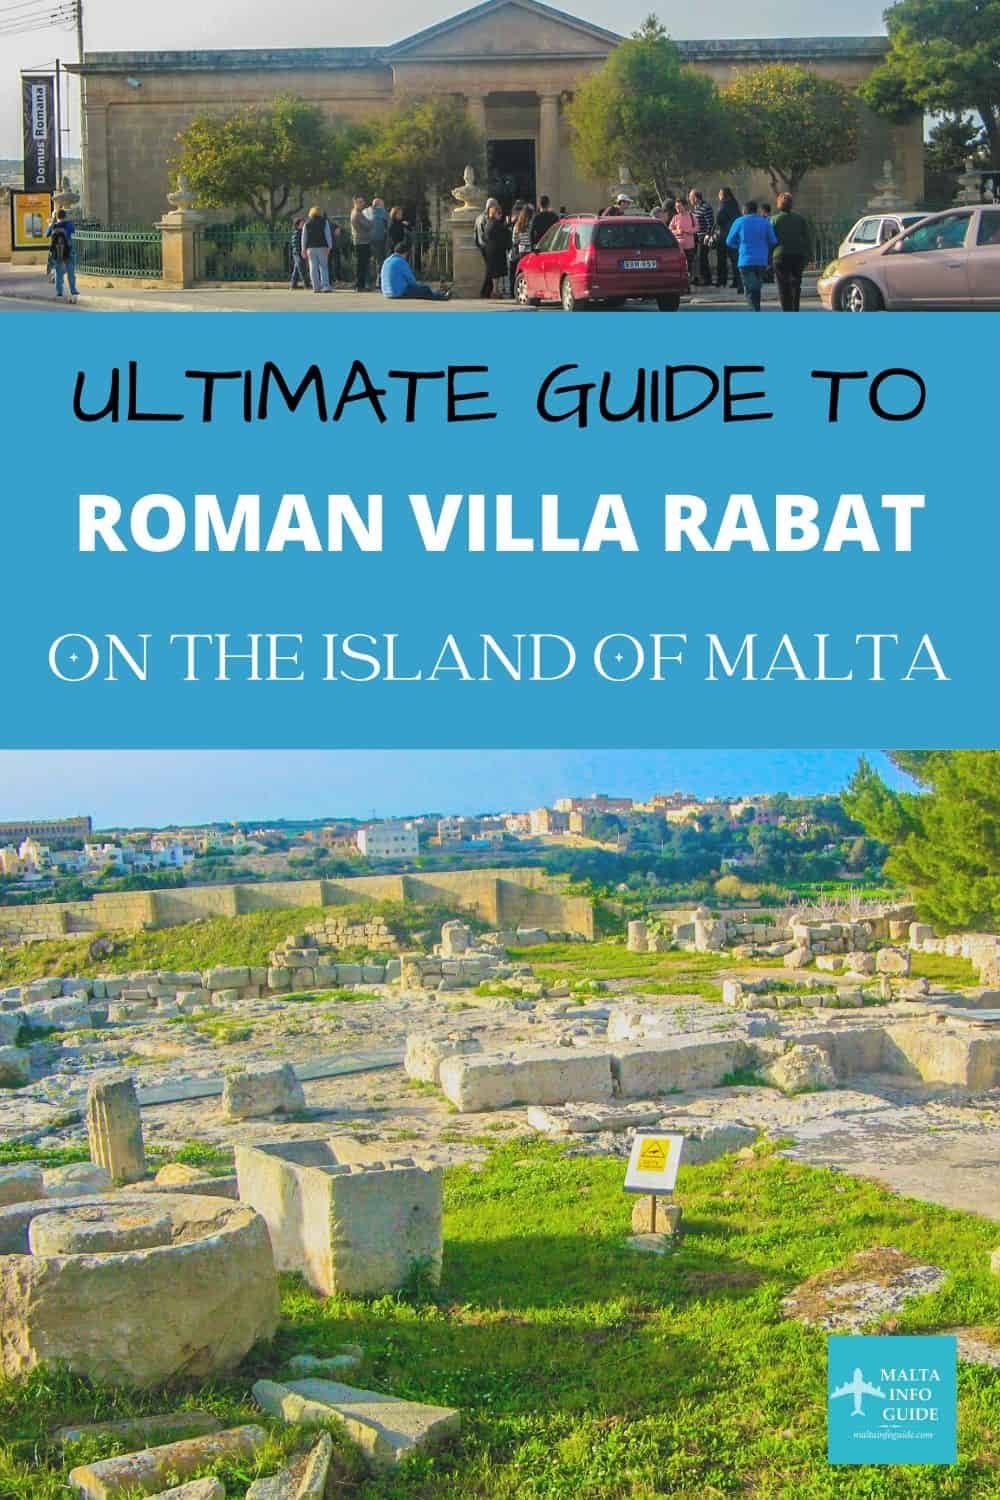 Visit the Roman Villa in Rabat Malta. Here is a guide that will help your visit.